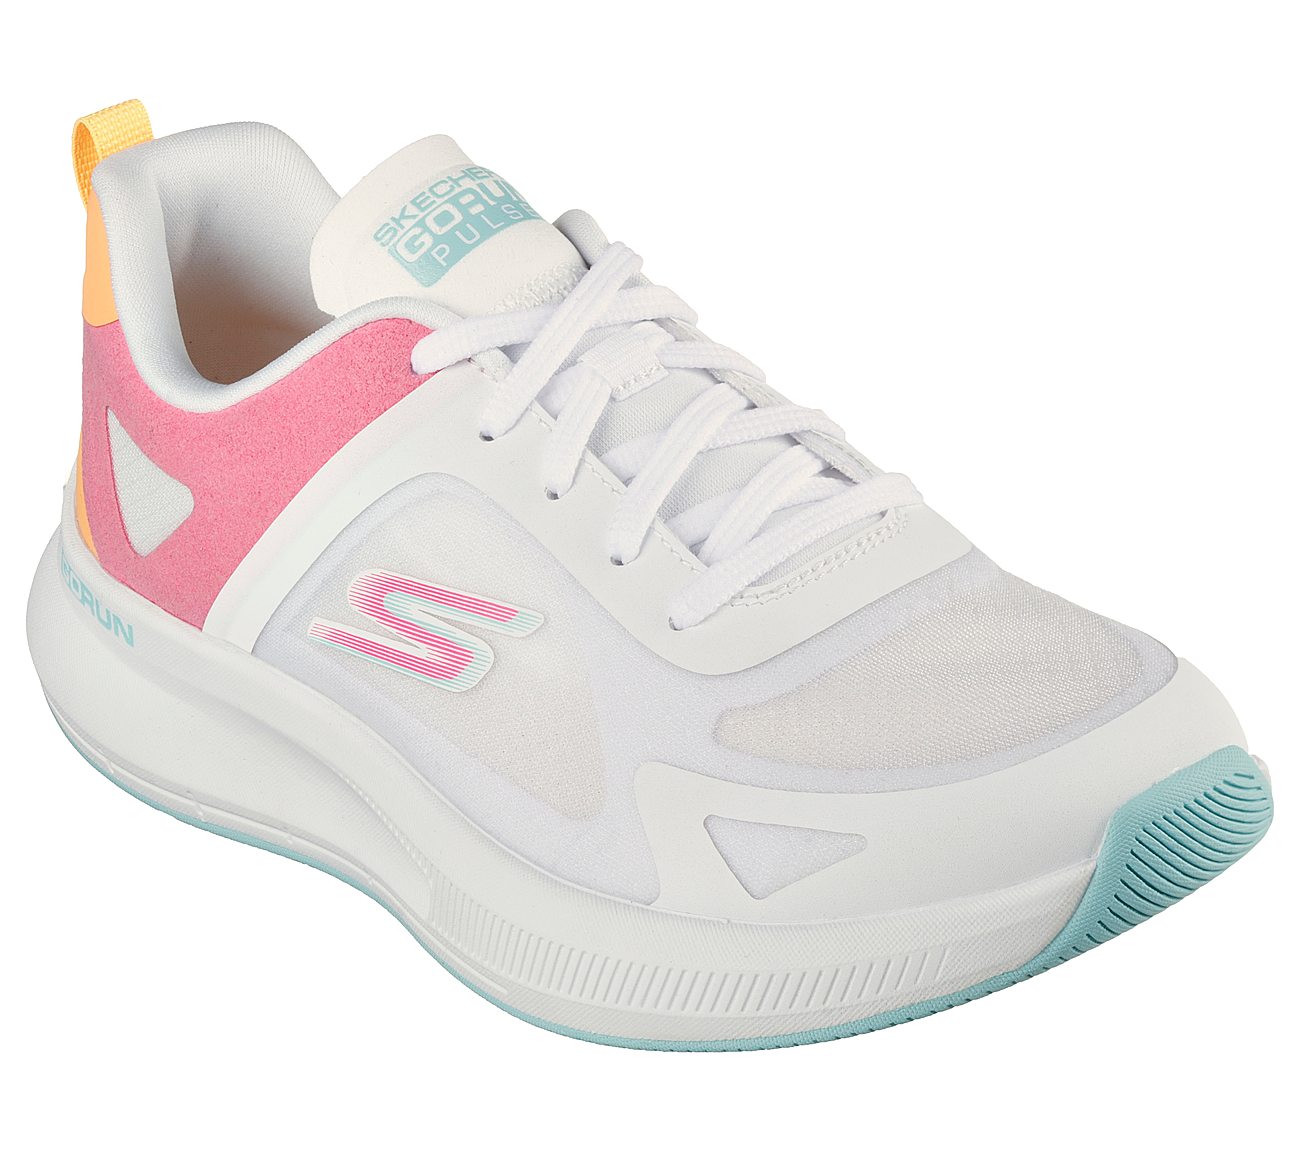 GO RUN PULSE - OPERATE, WHITE/HOT PINK Footwear Lateral View